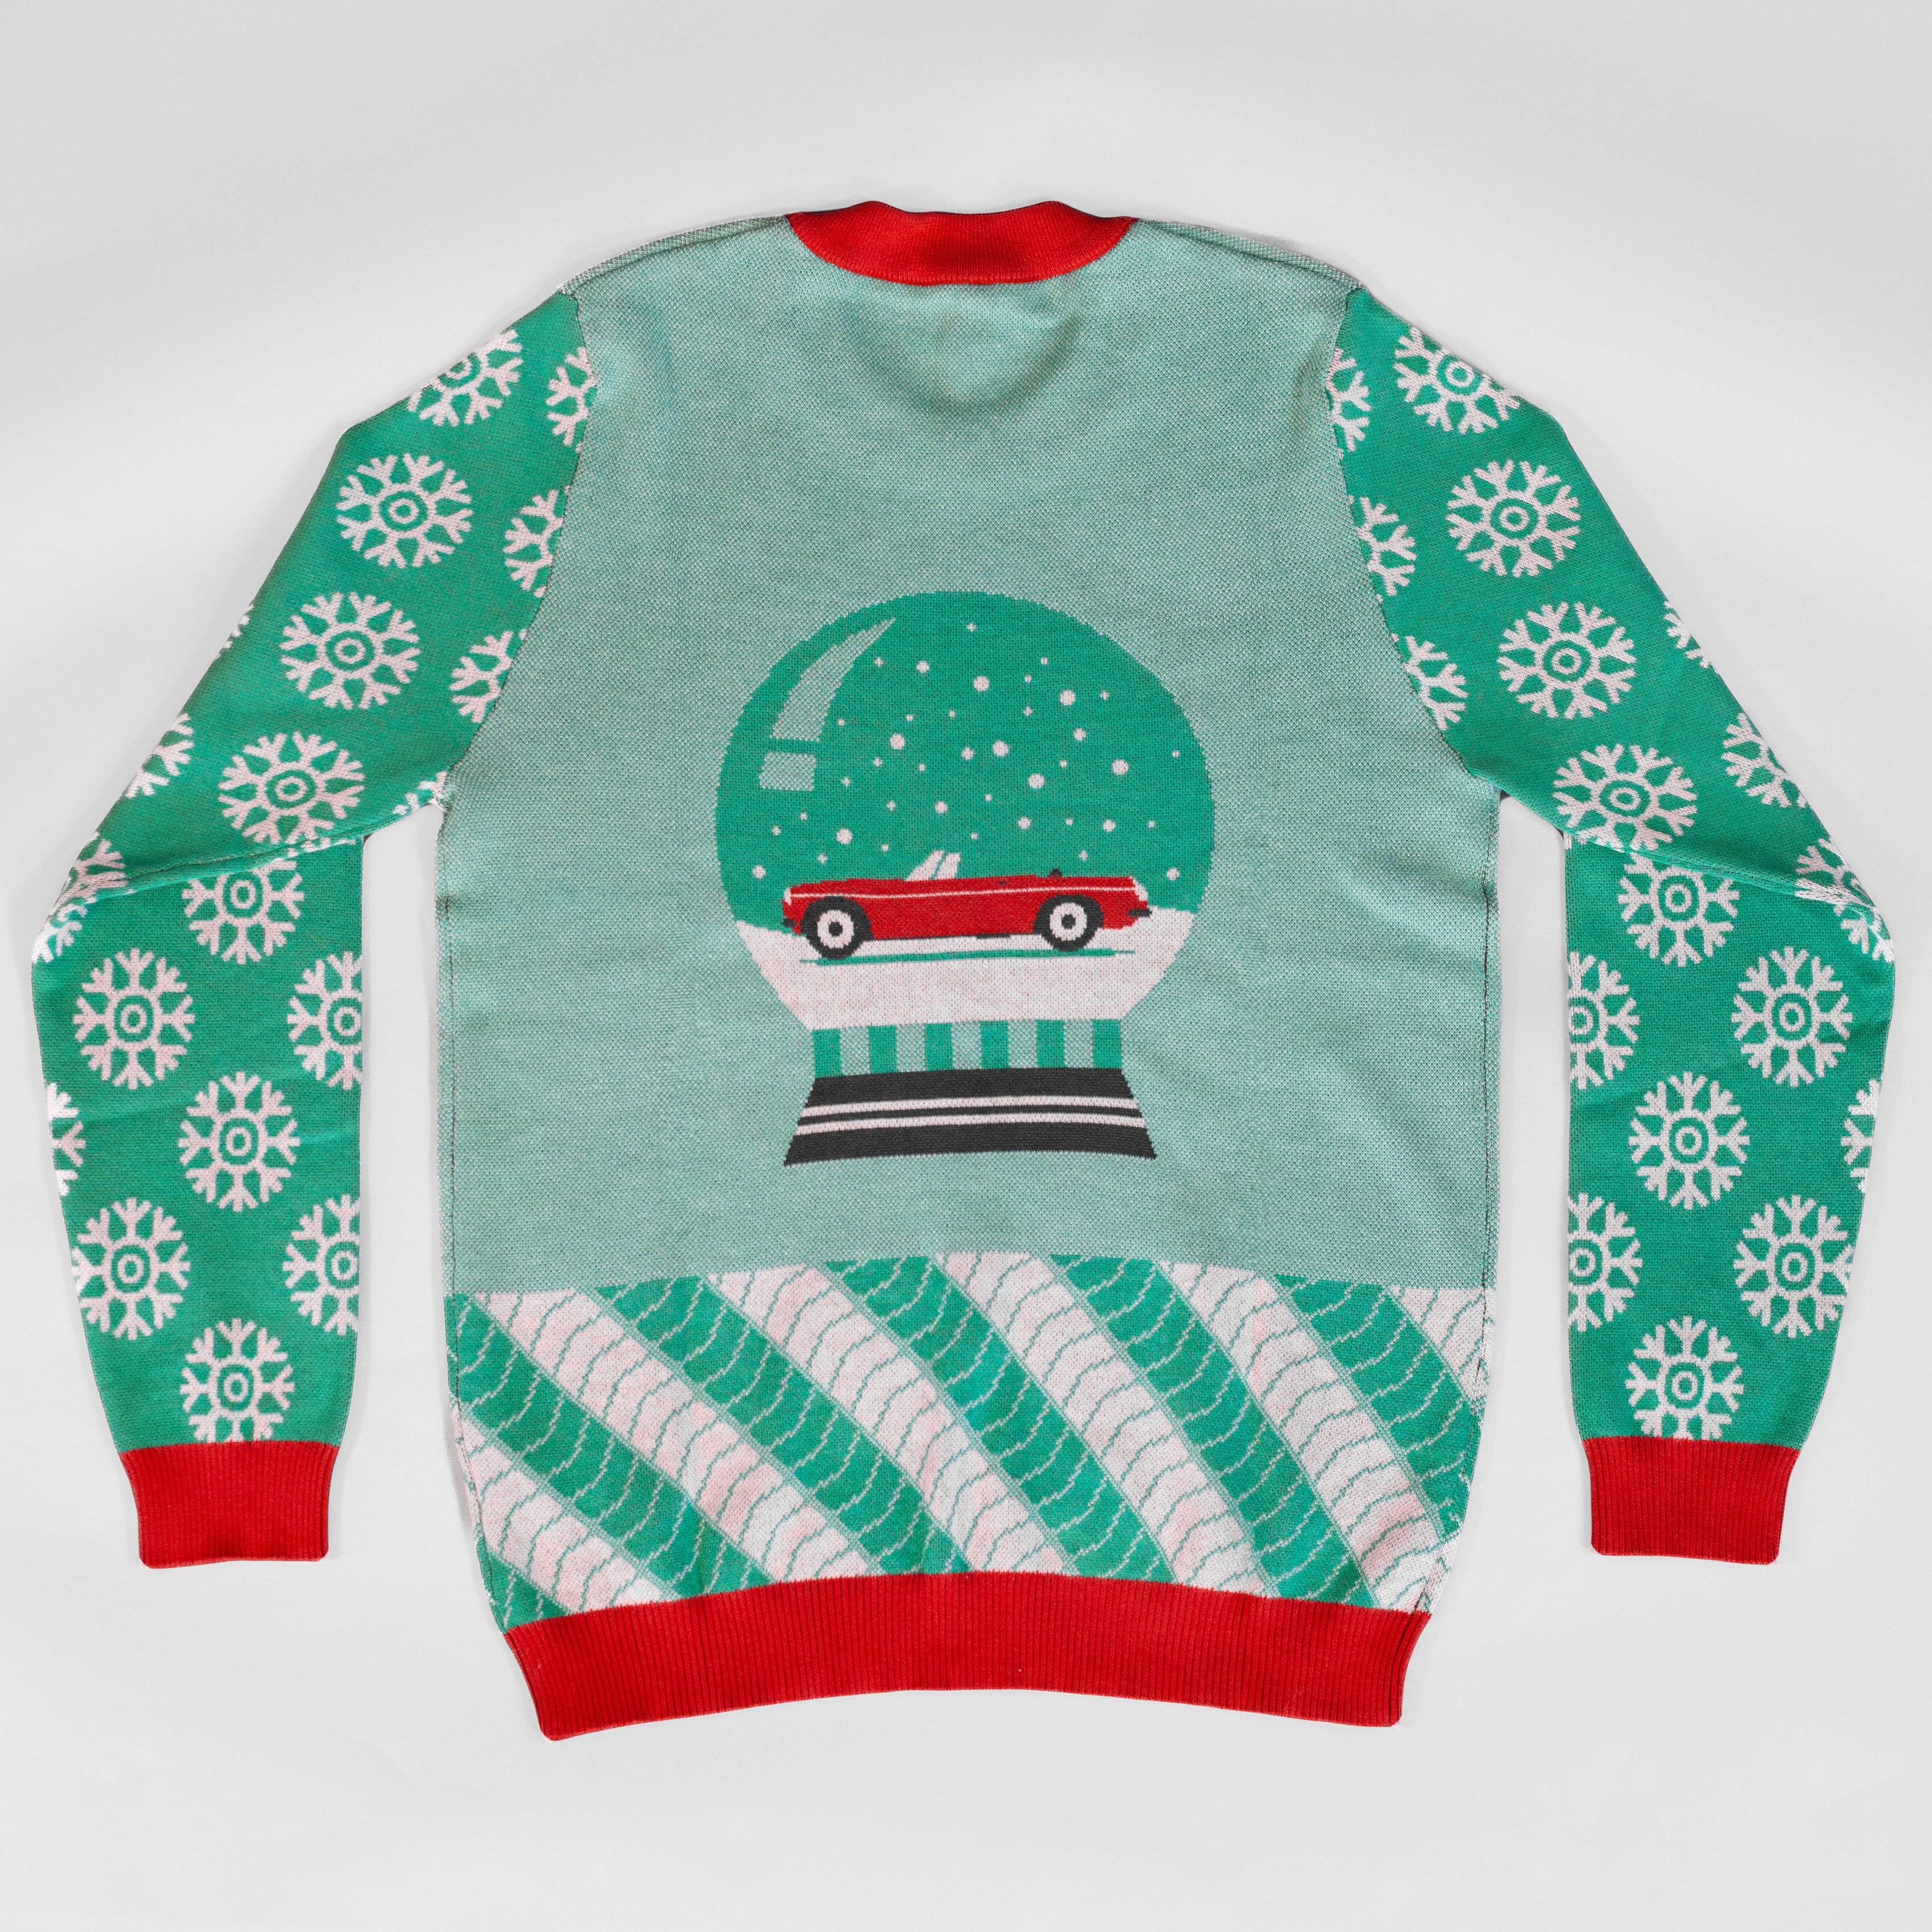 6th Annual Holiday Sweater